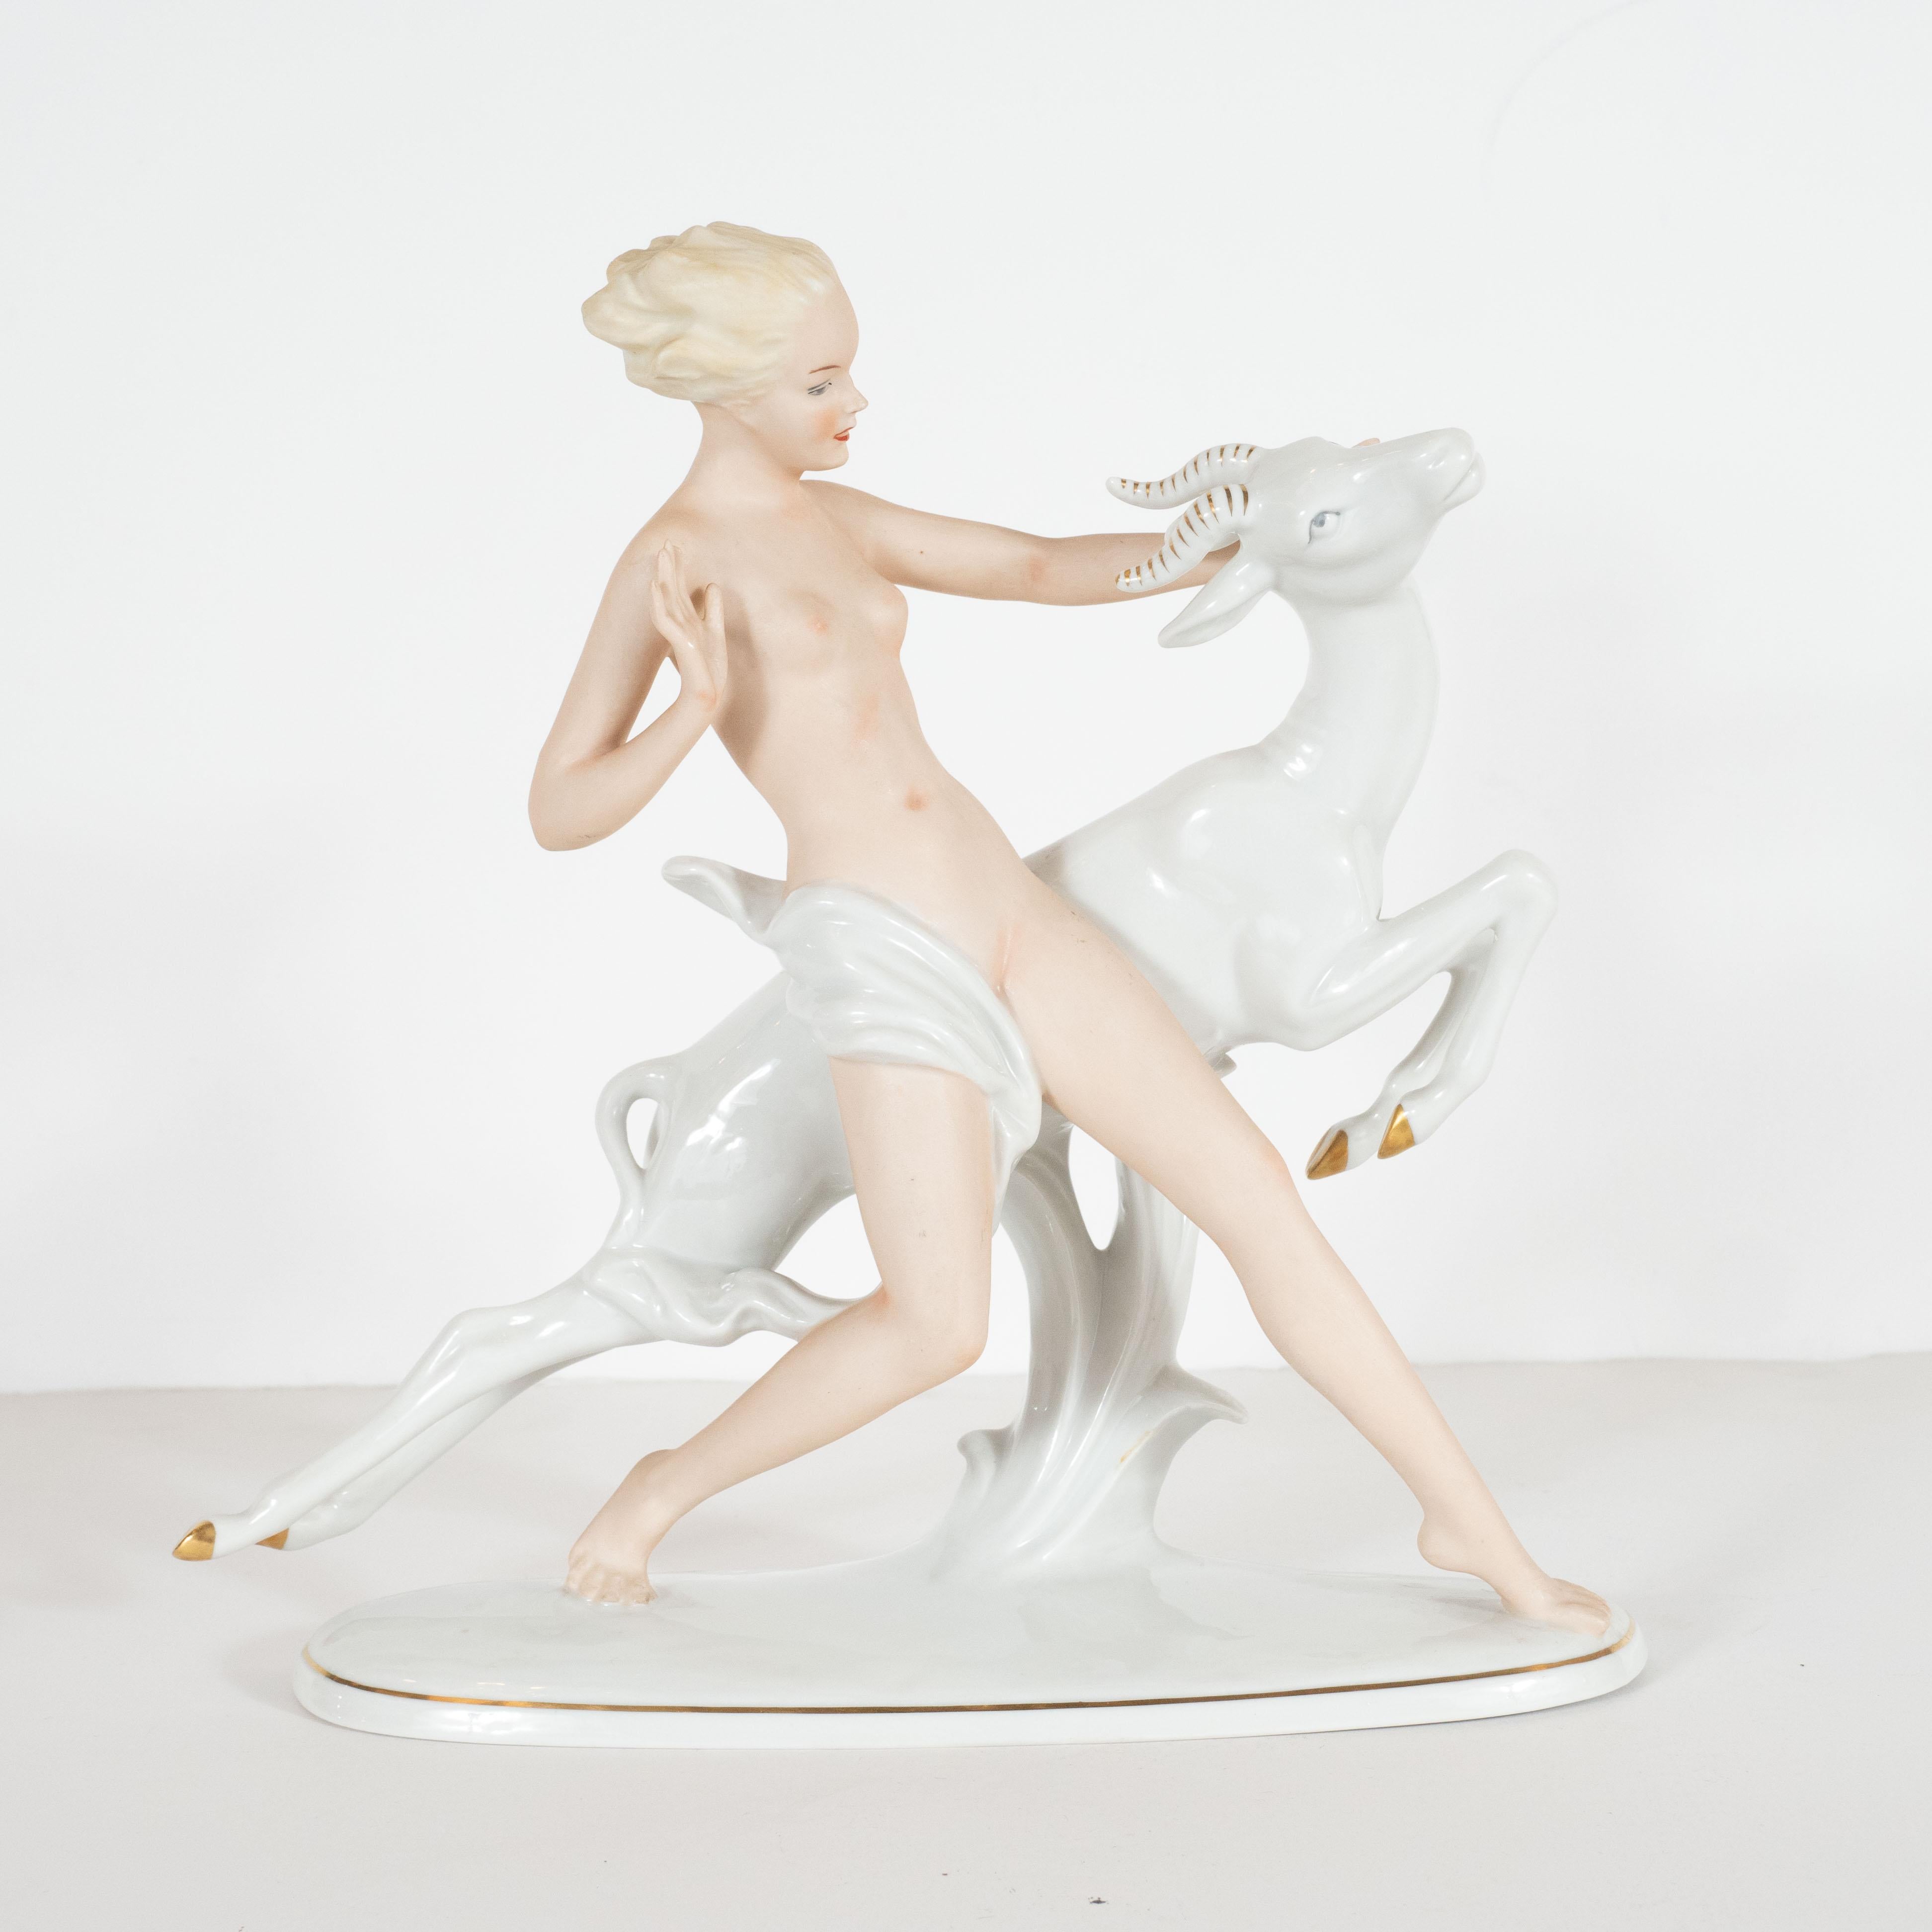 Art Deco Porcelain Statue of Female Figure with Leaping Ibex by Wallendorfer In Excellent Condition For Sale In New York, NY